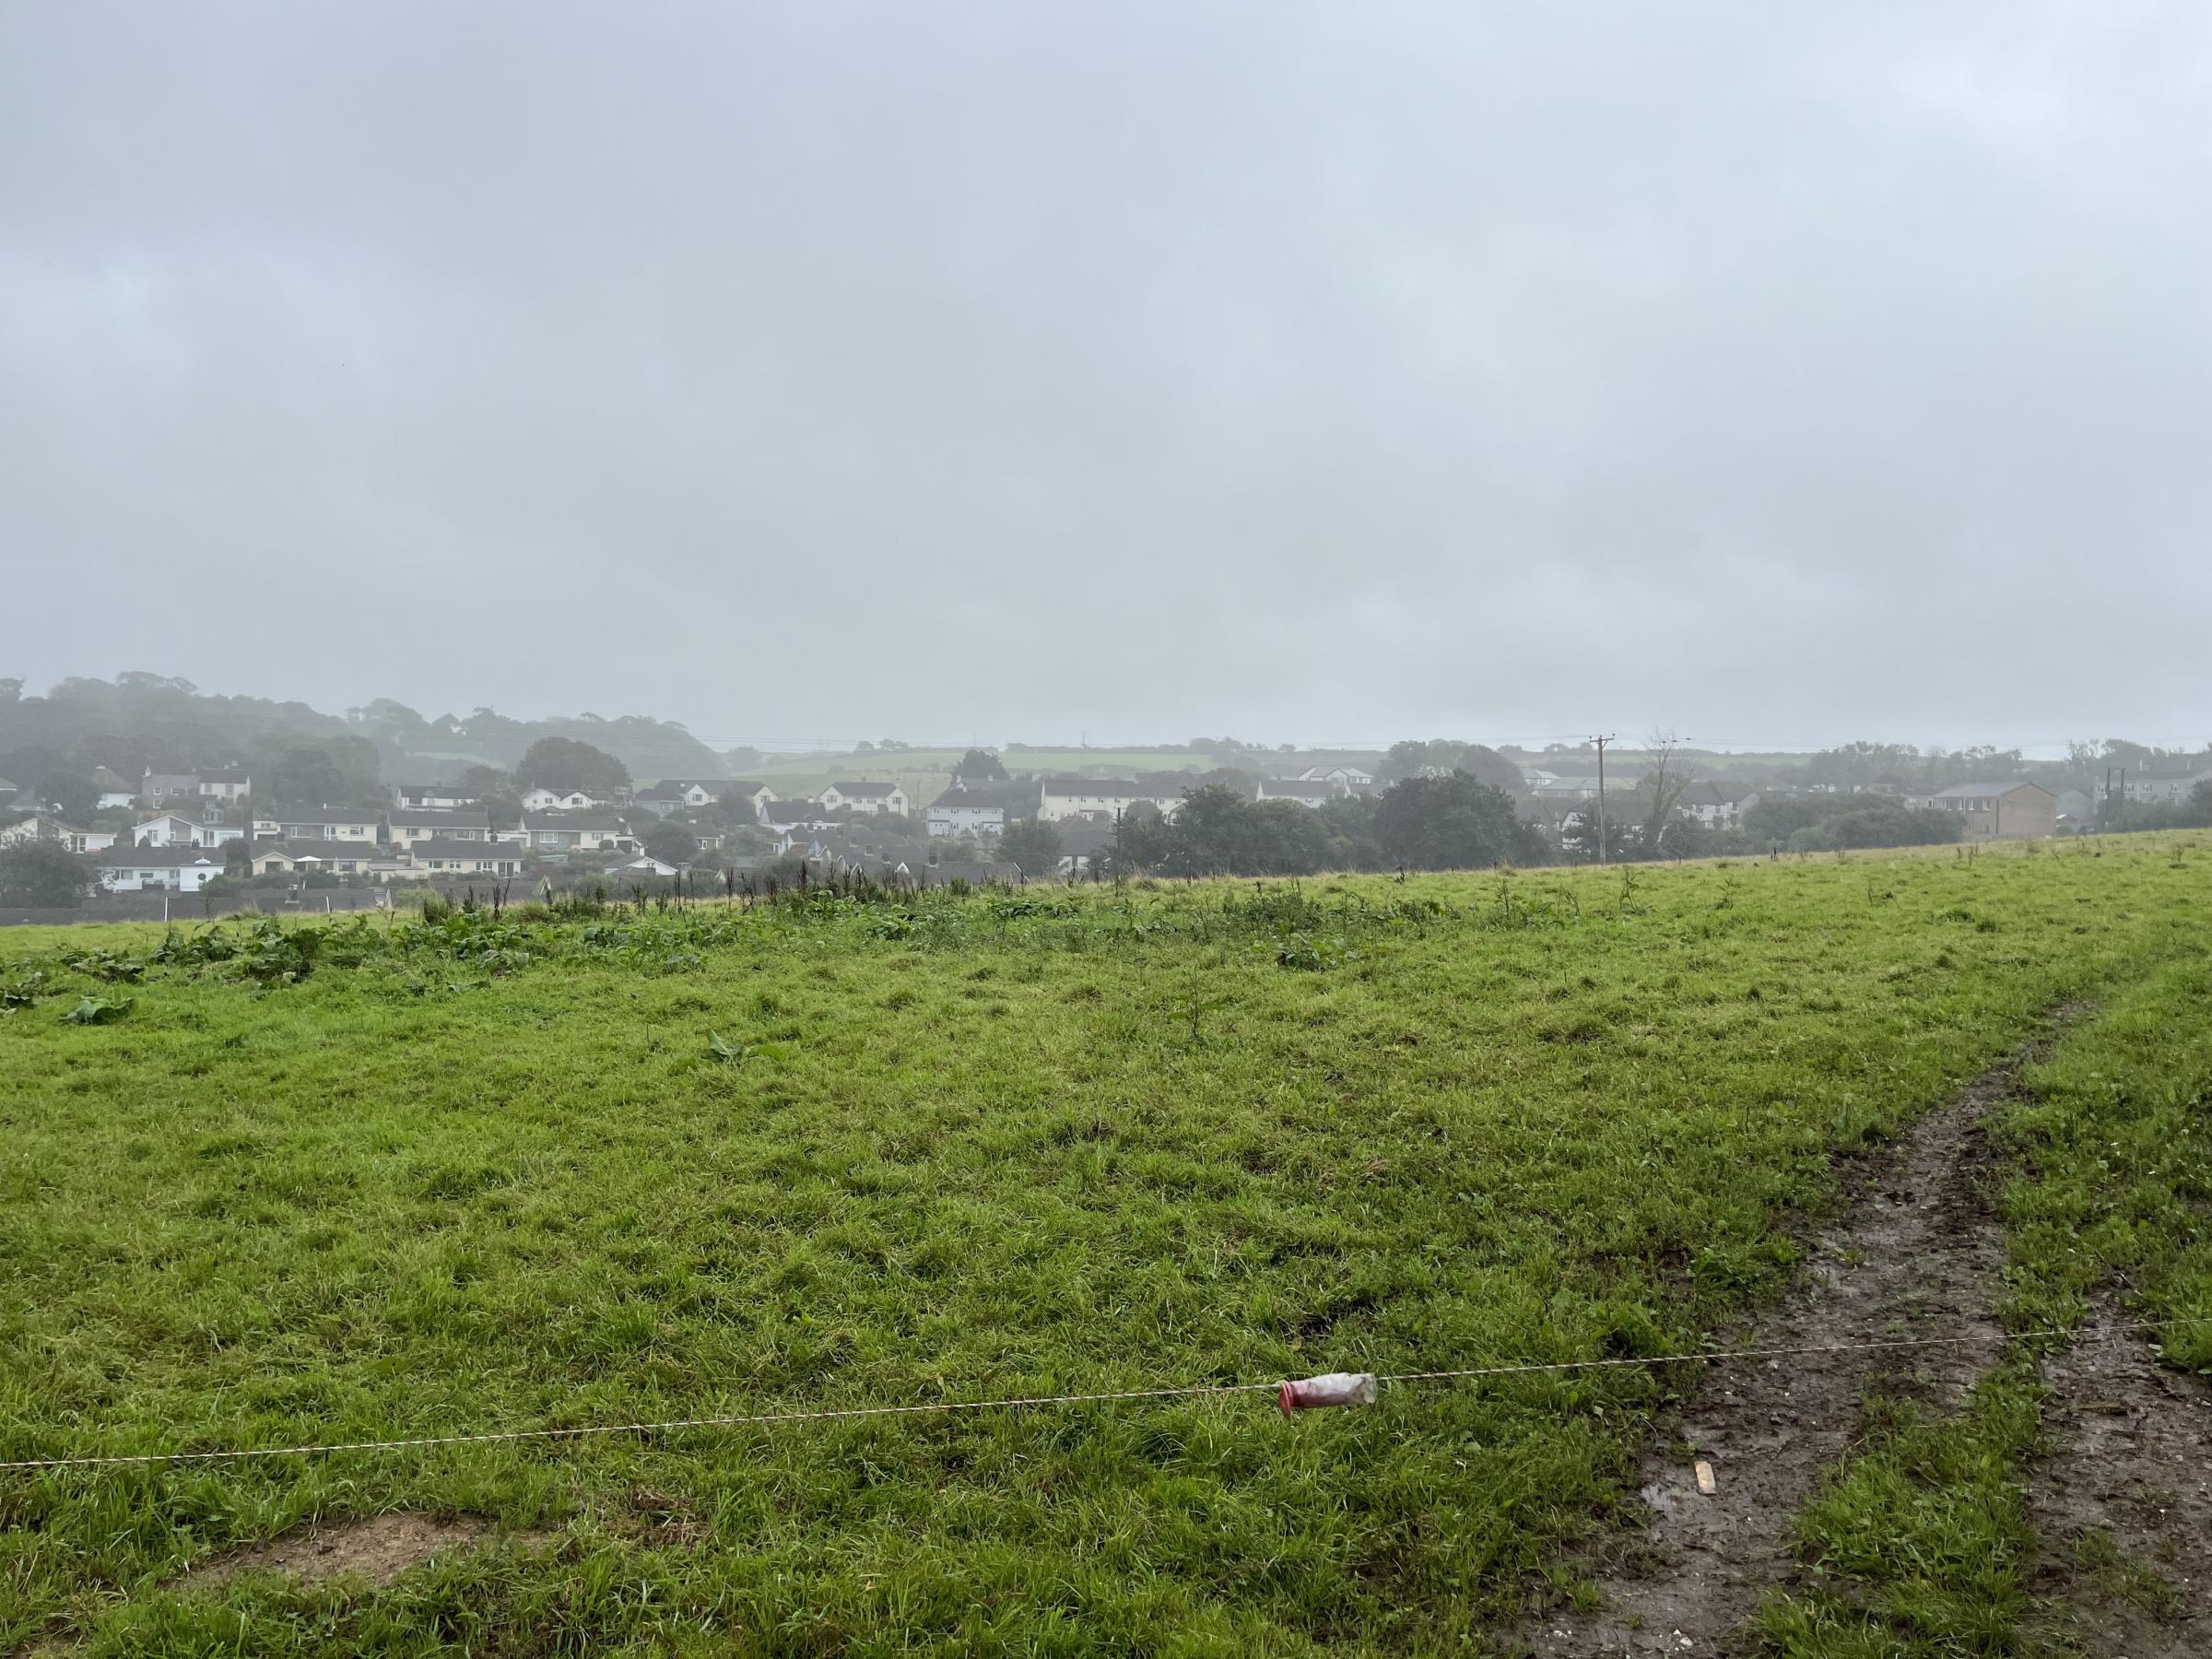 The field earmarked for affordable housing in Veryan (Pic: Lee Trewhela / LDRS)